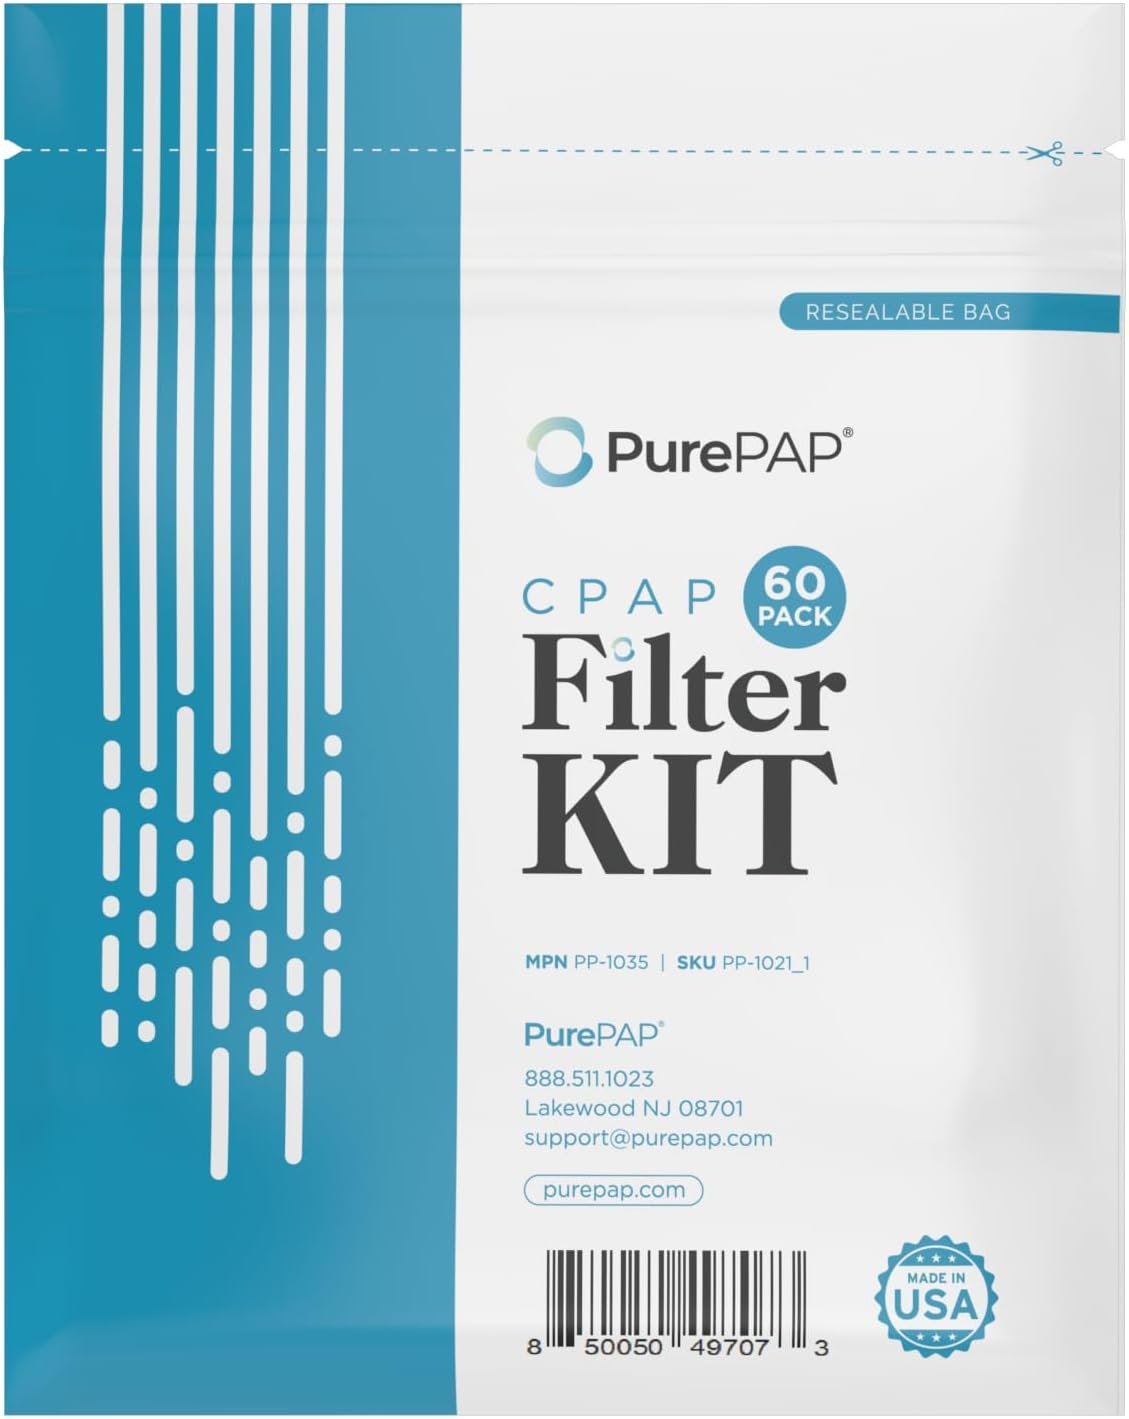 Premium USA Made CPAP Filters - 60-Pack, Compatible with ResMed AirSense 11 Machines - High Quality CPAP Supplies